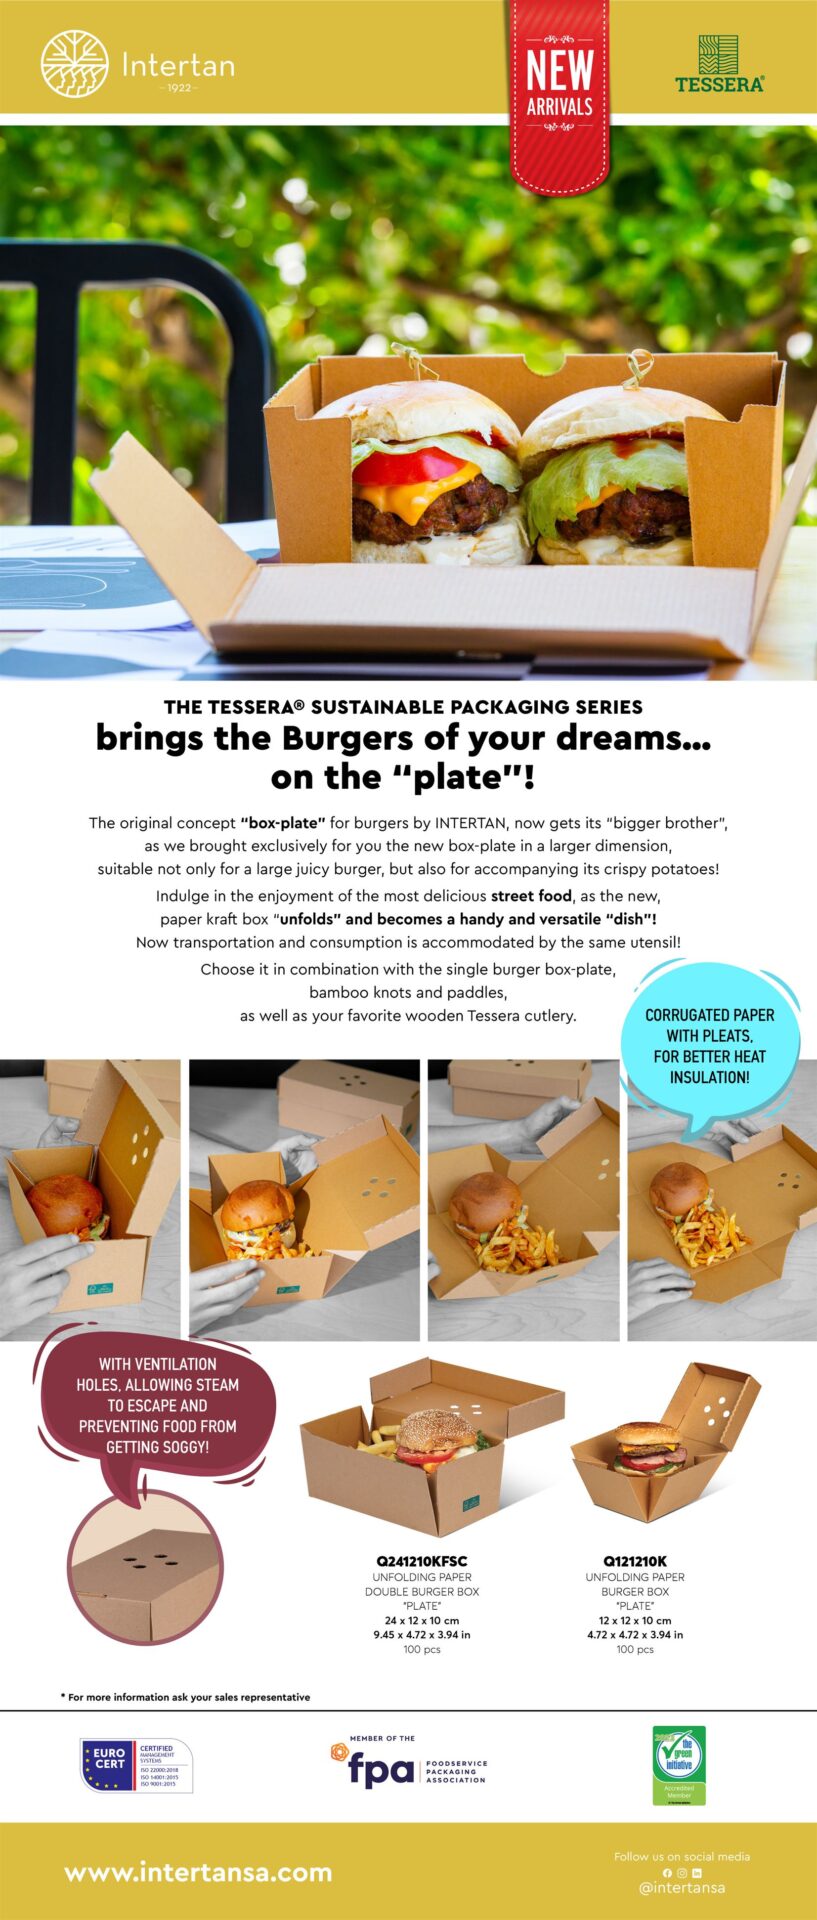 New TESSERA double "box-plate" for burgers Newsletter | Intertan S.A.